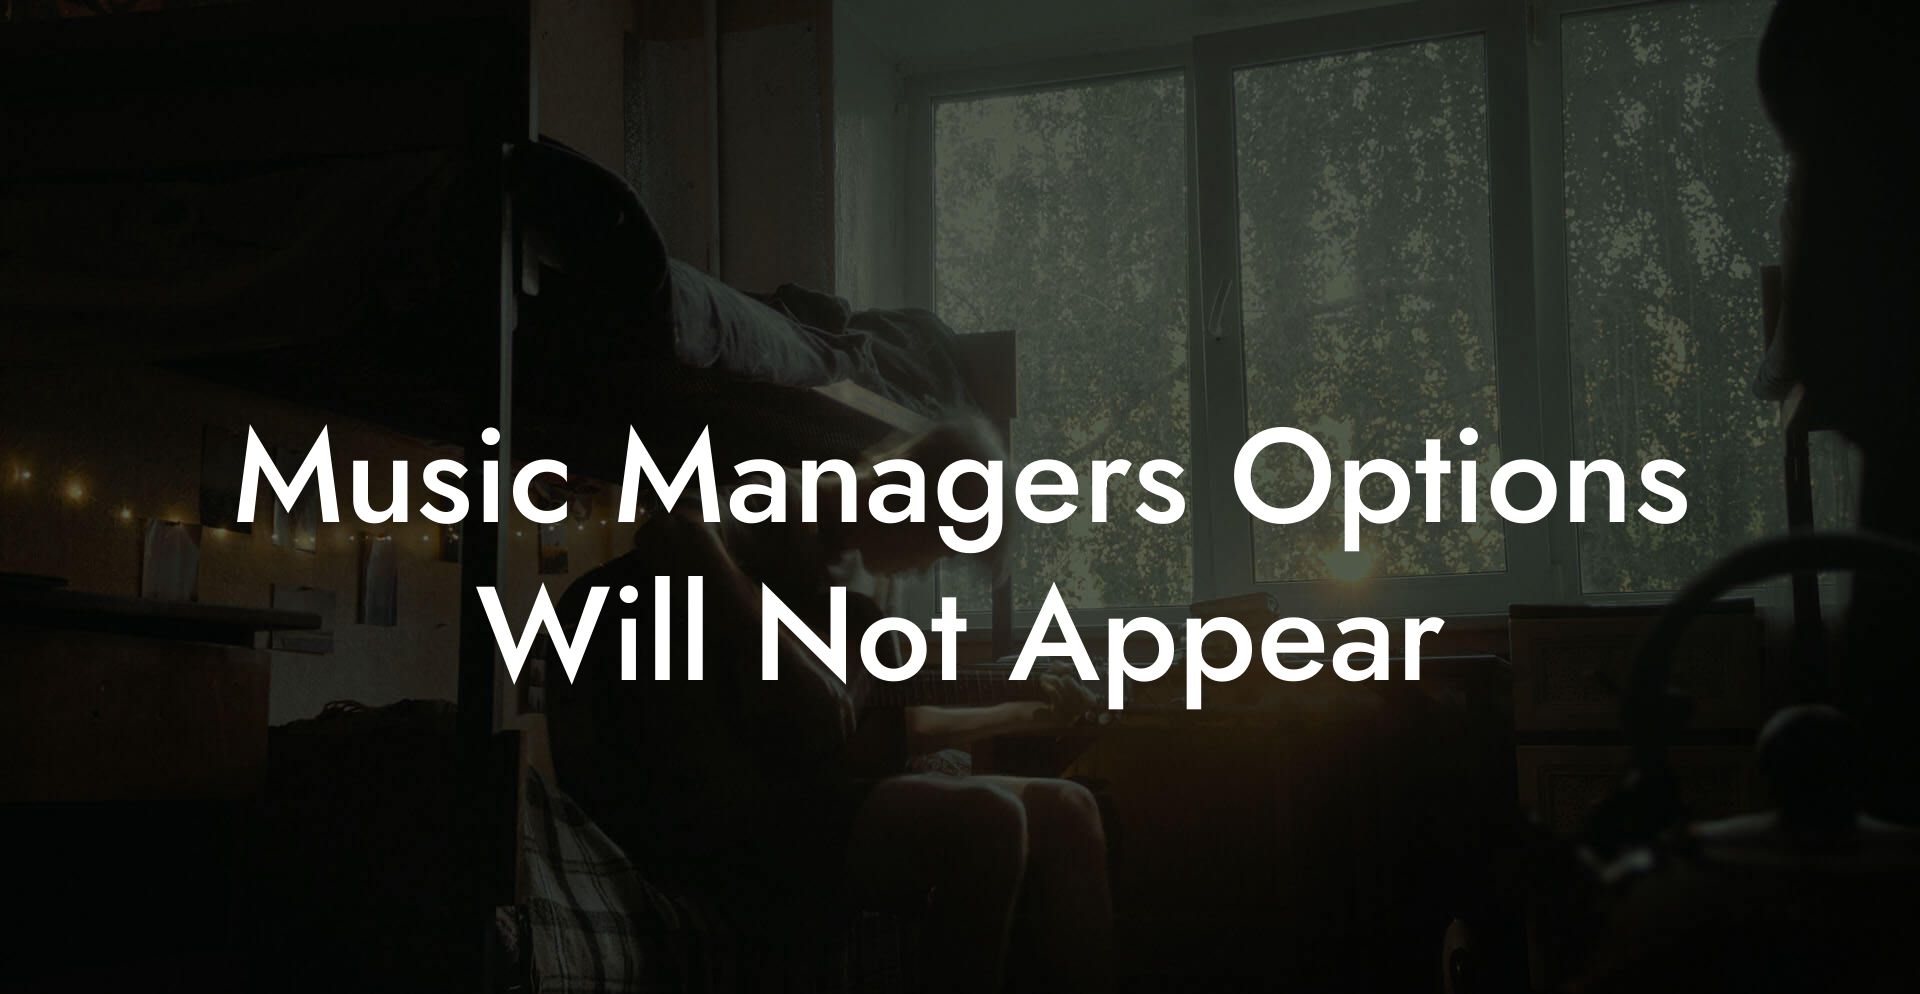 Music Managers Options Will Not Appear